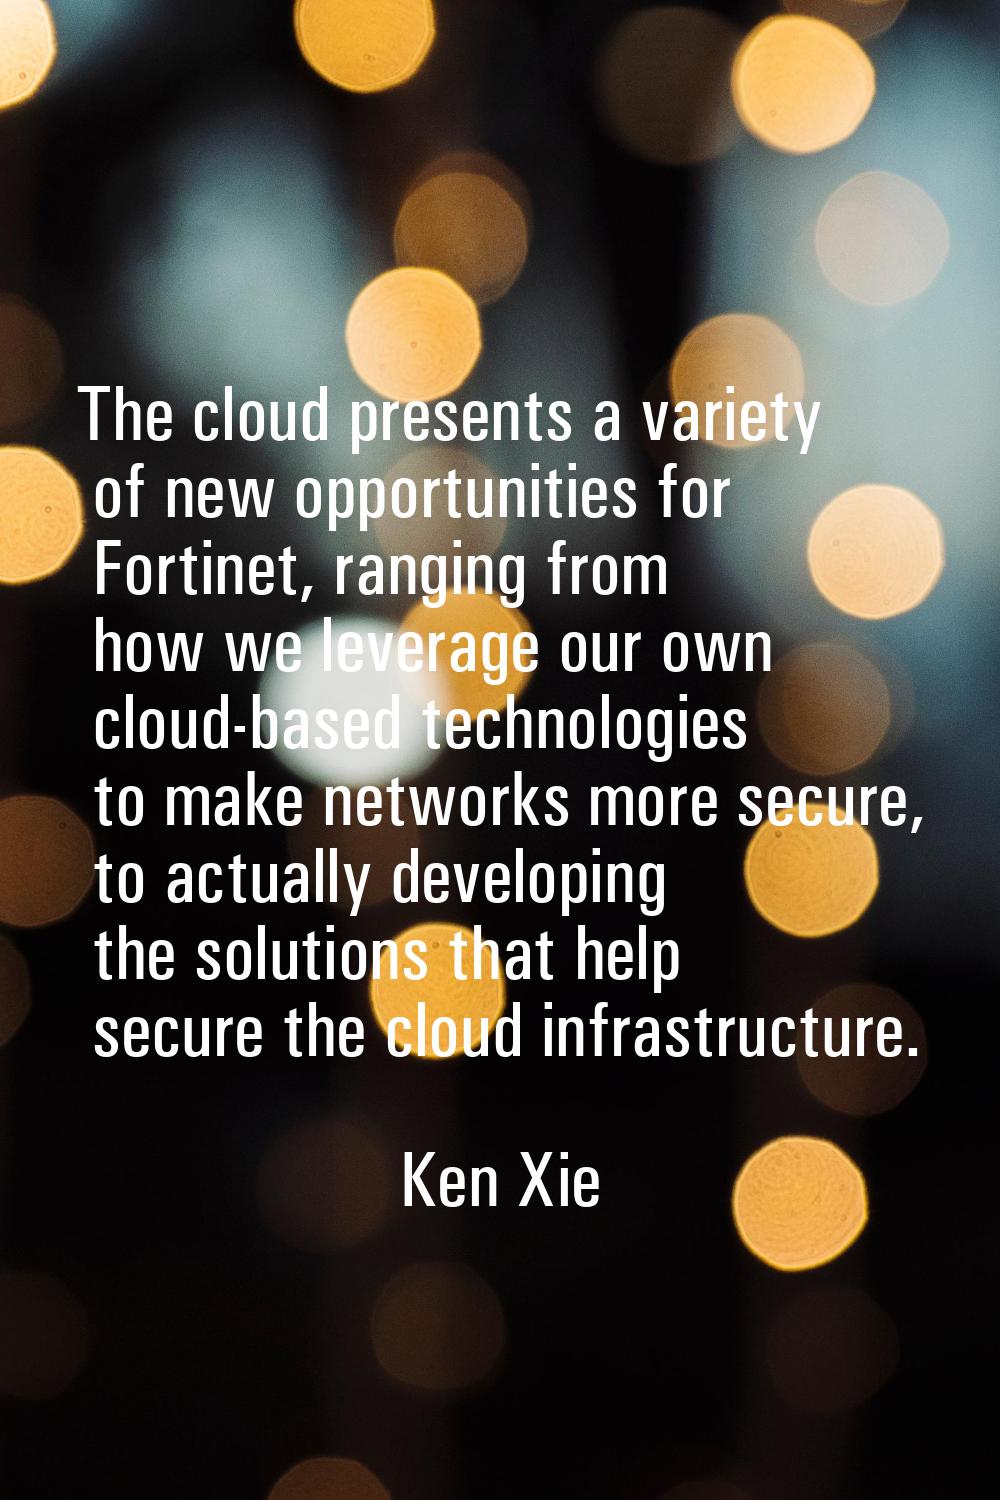 The cloud presents a variety of new opportunities for Fortinet, ranging from how we leverage our ow